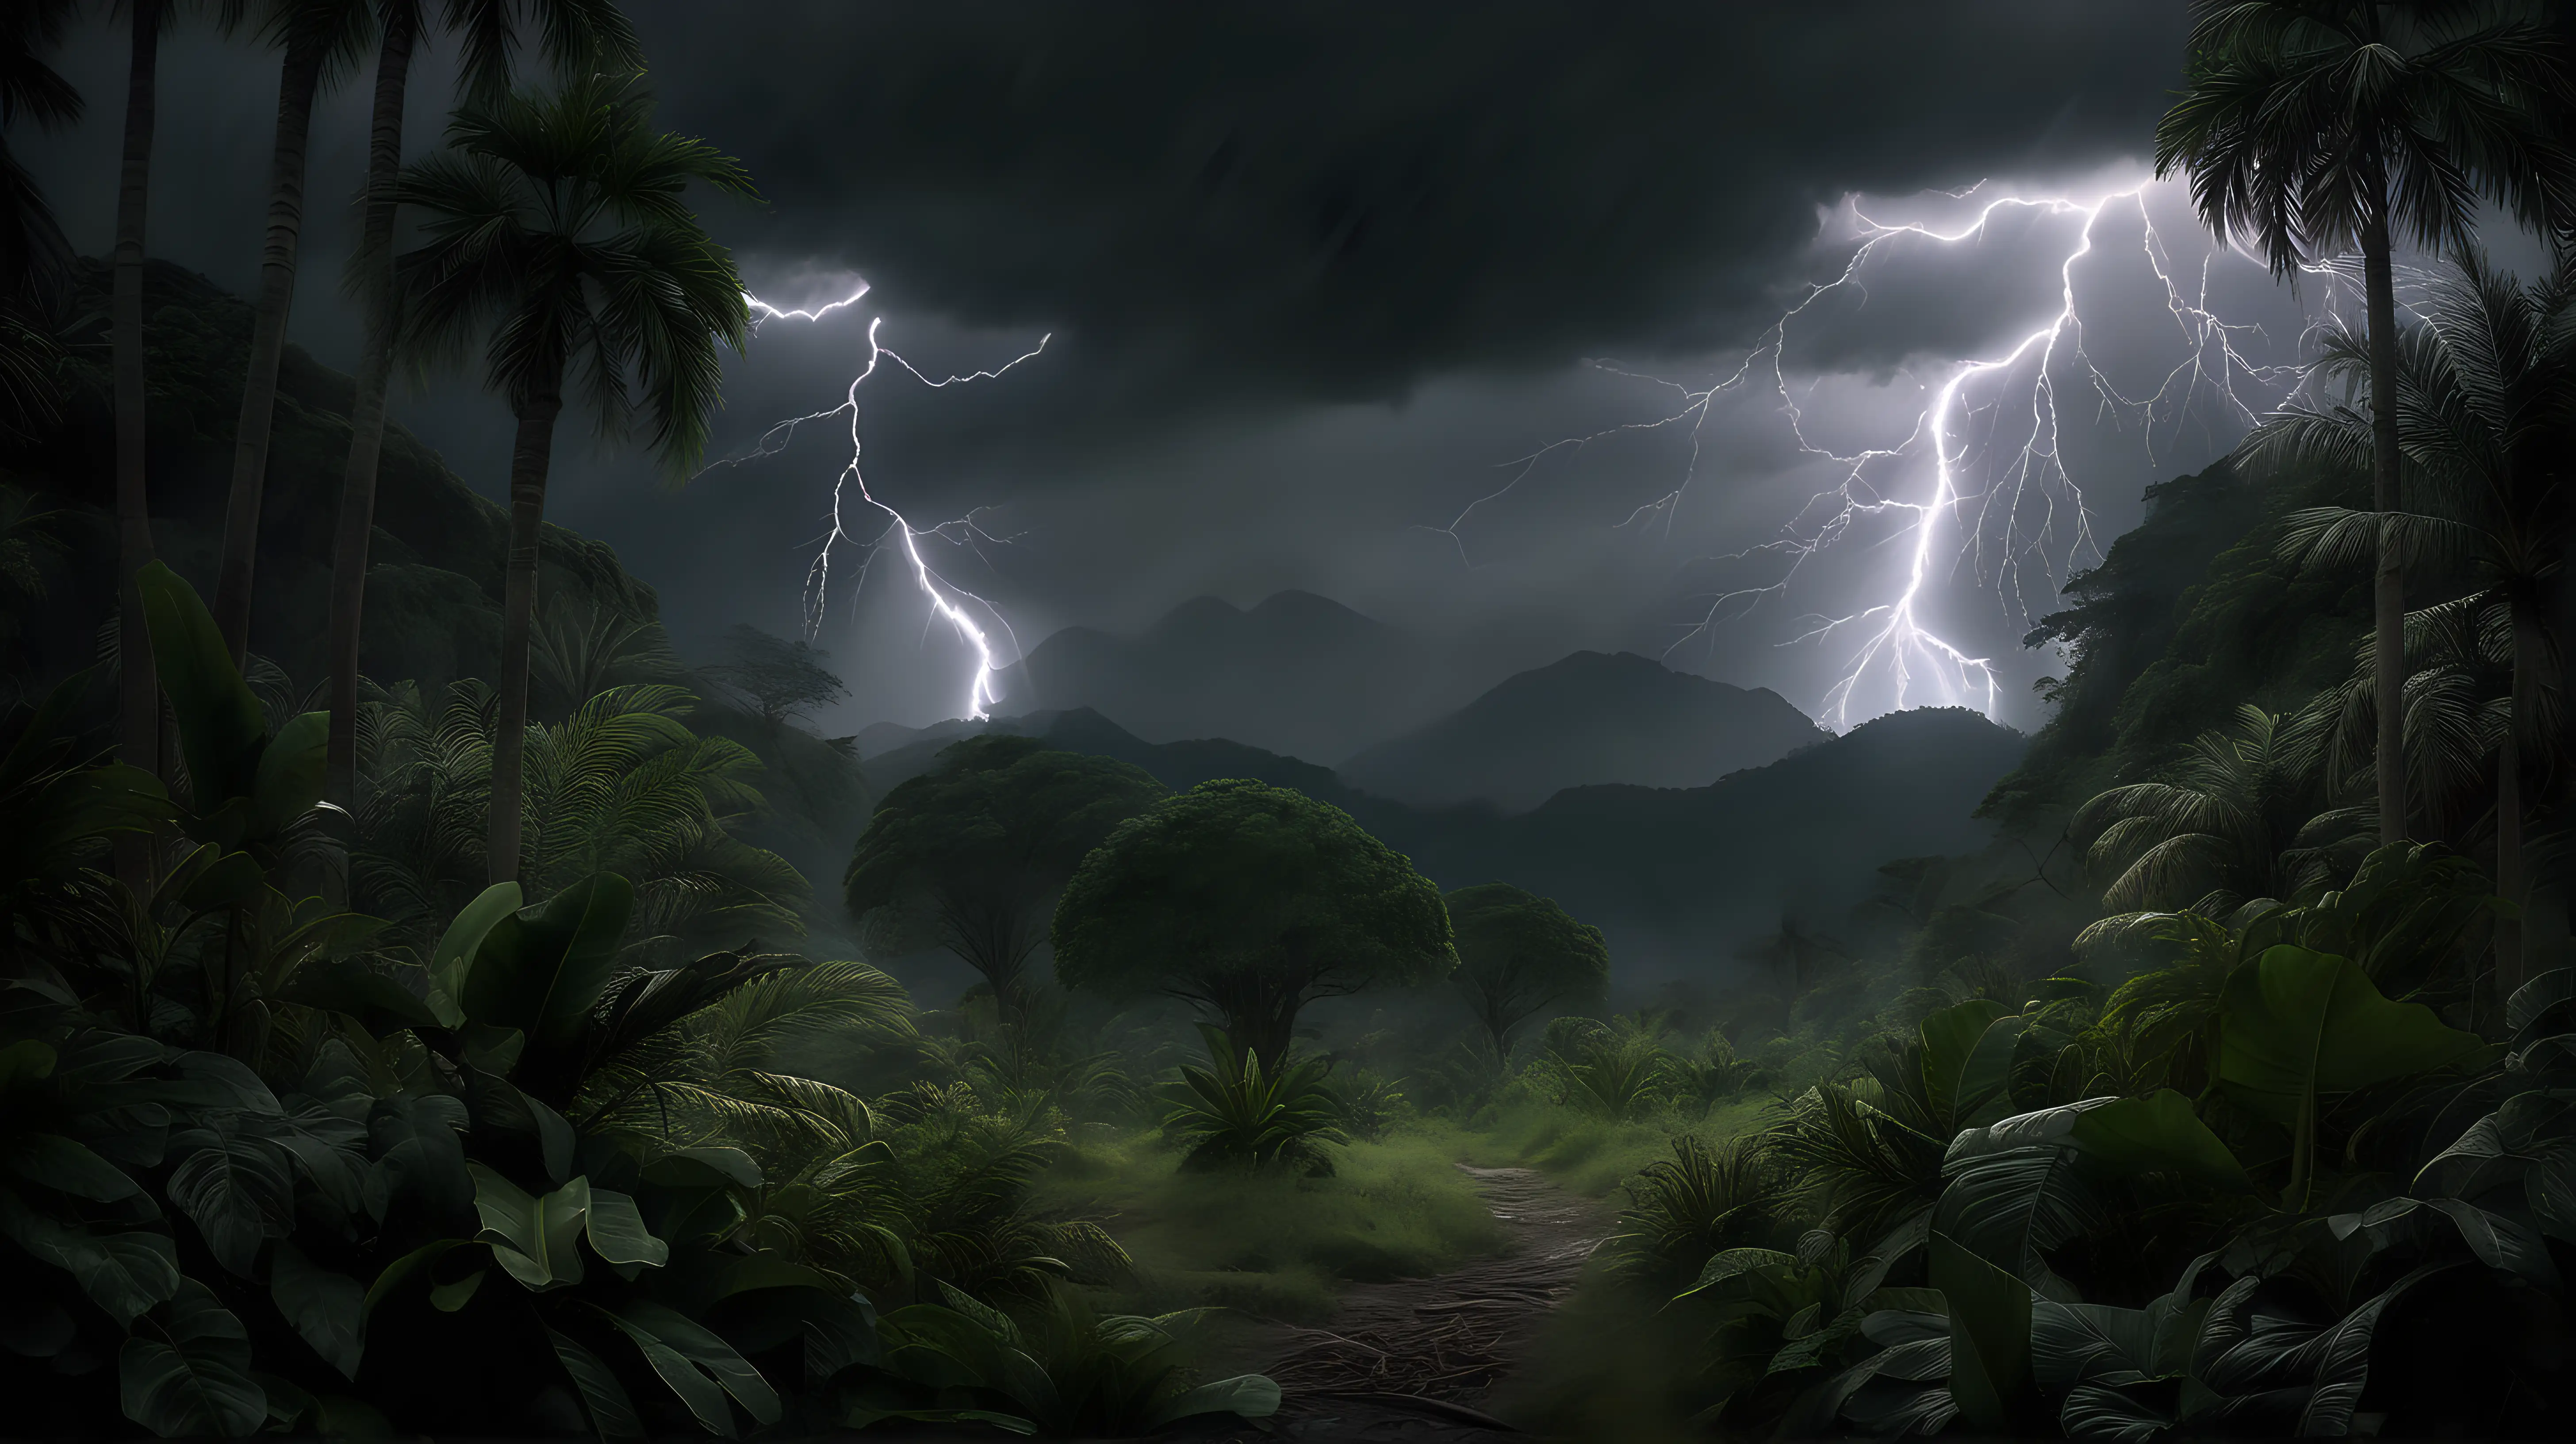 no person, harsh jungle, dark, gloomy, lightening strikes in the background, chiaroscuro enhancing the intricate details, in a digital Rendering “v6”